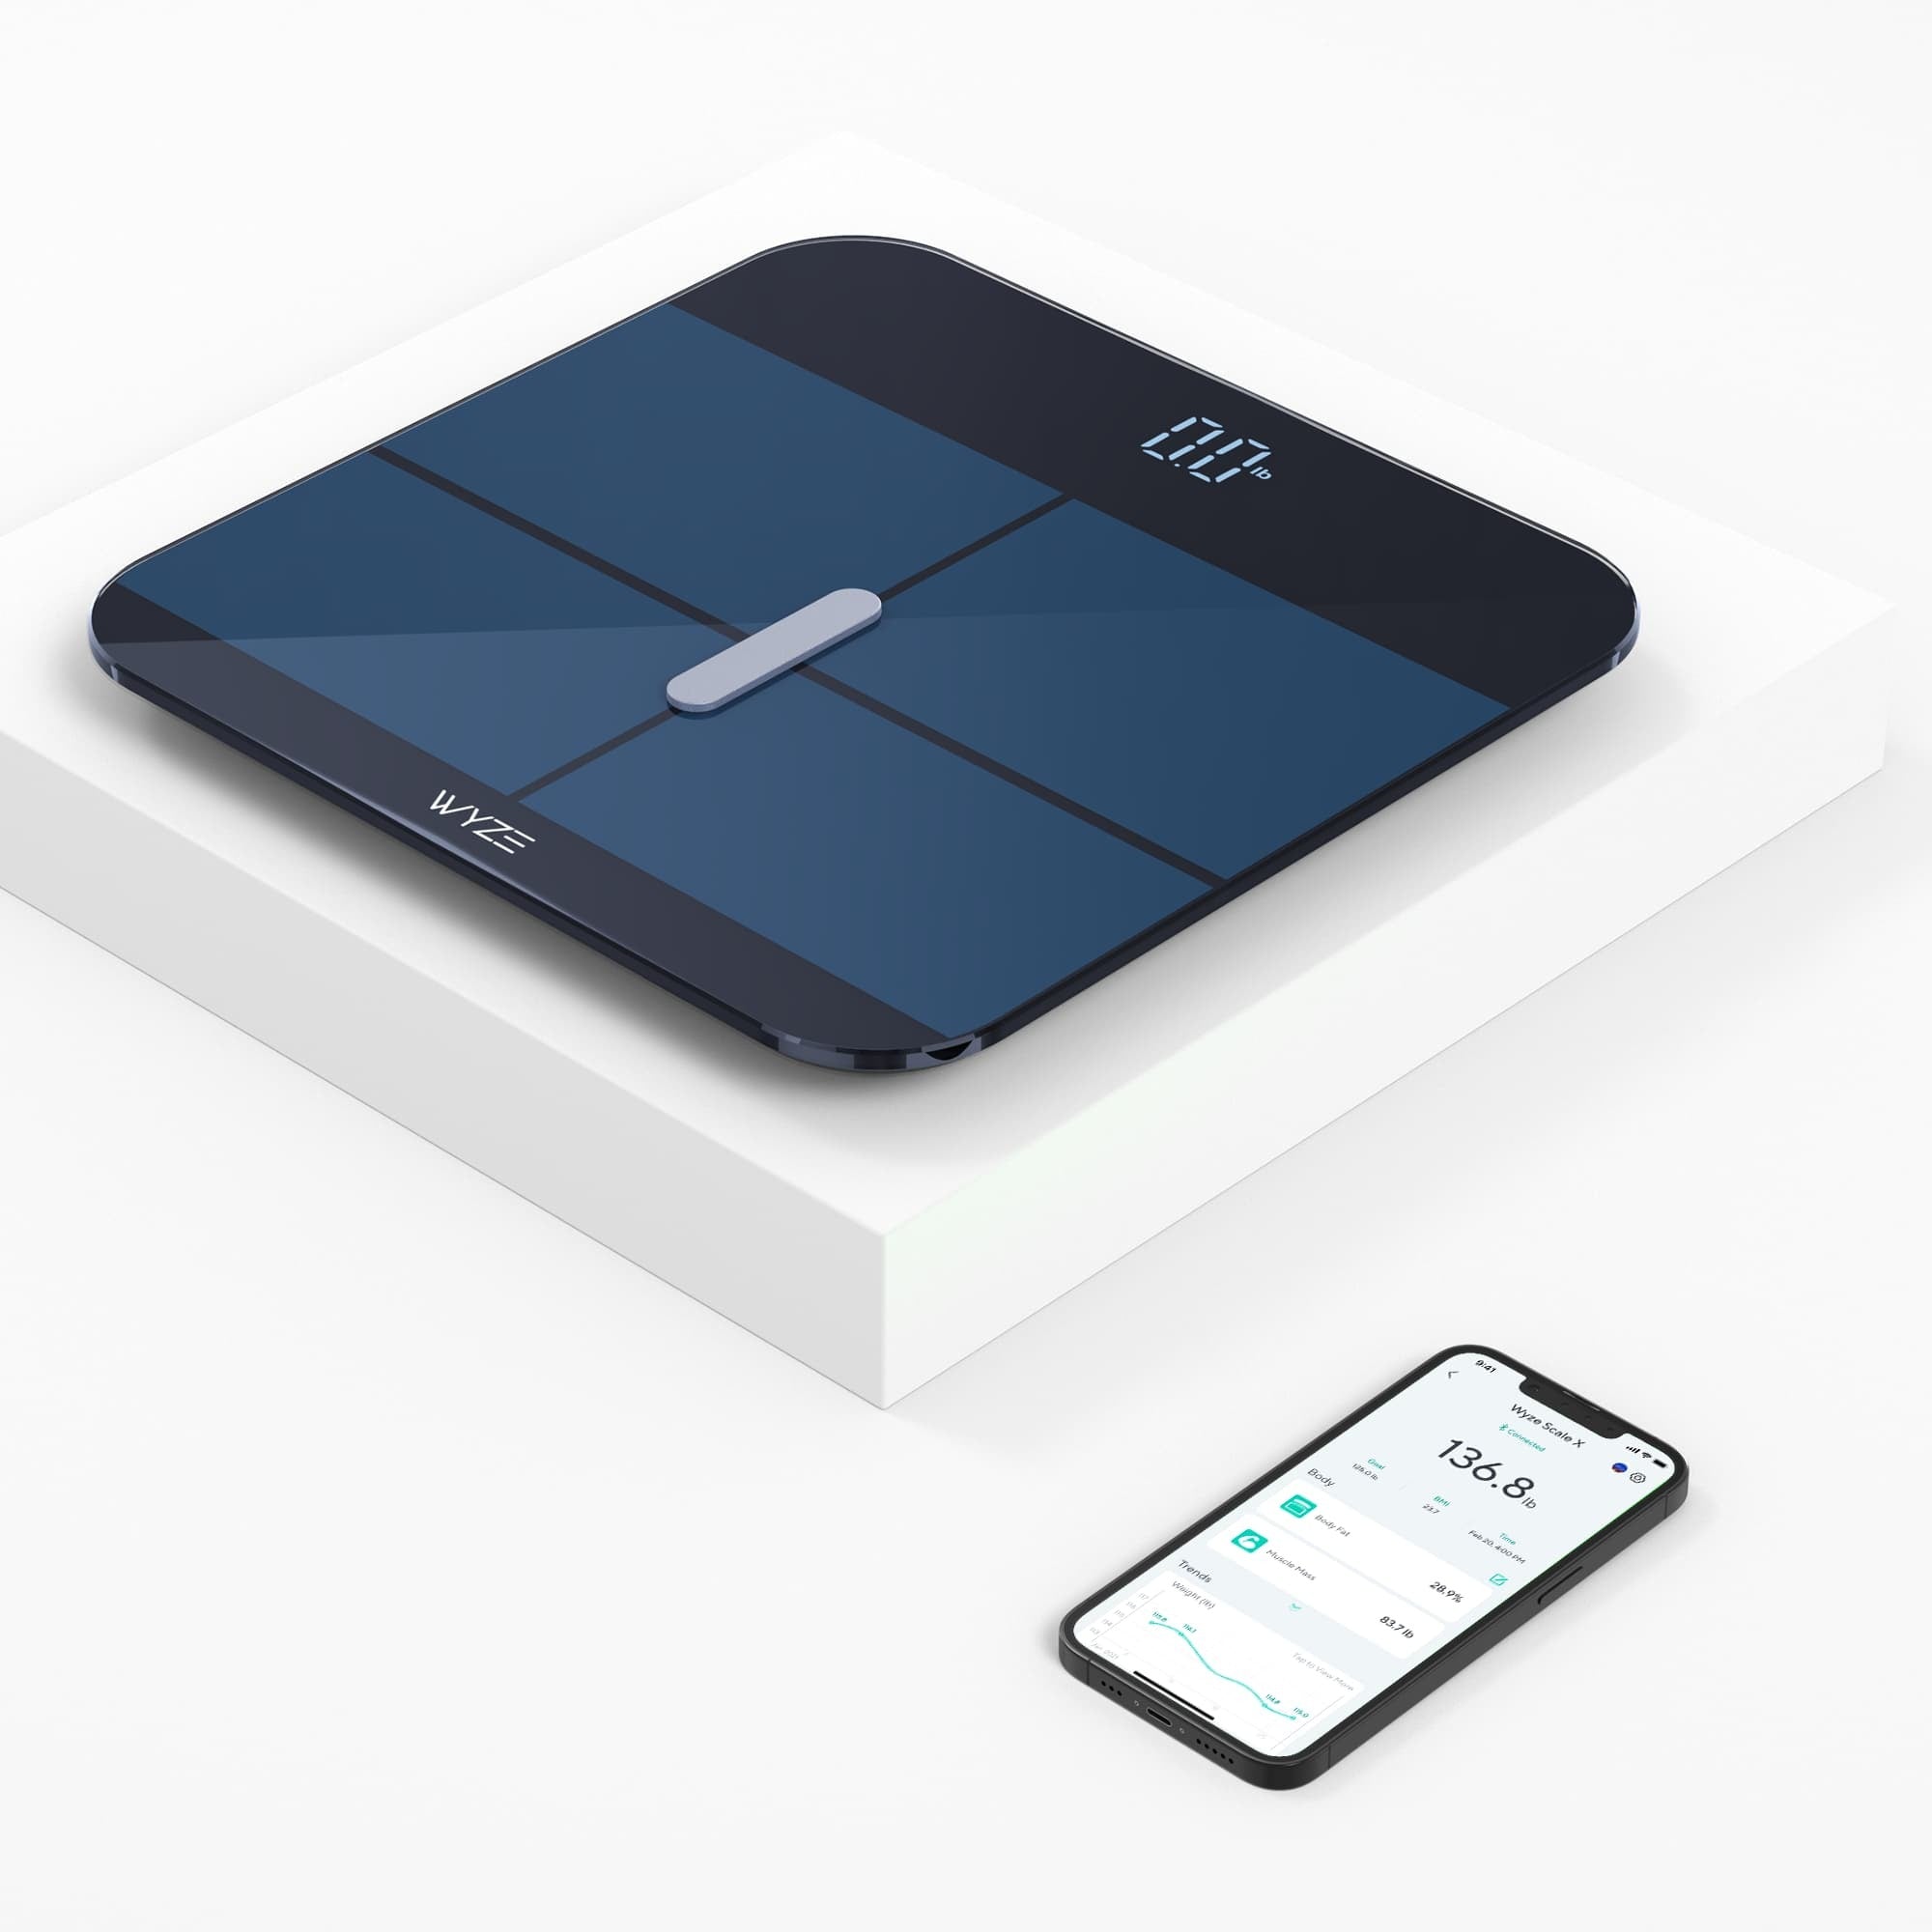 wyze smart scale guide - Apps on Google Play